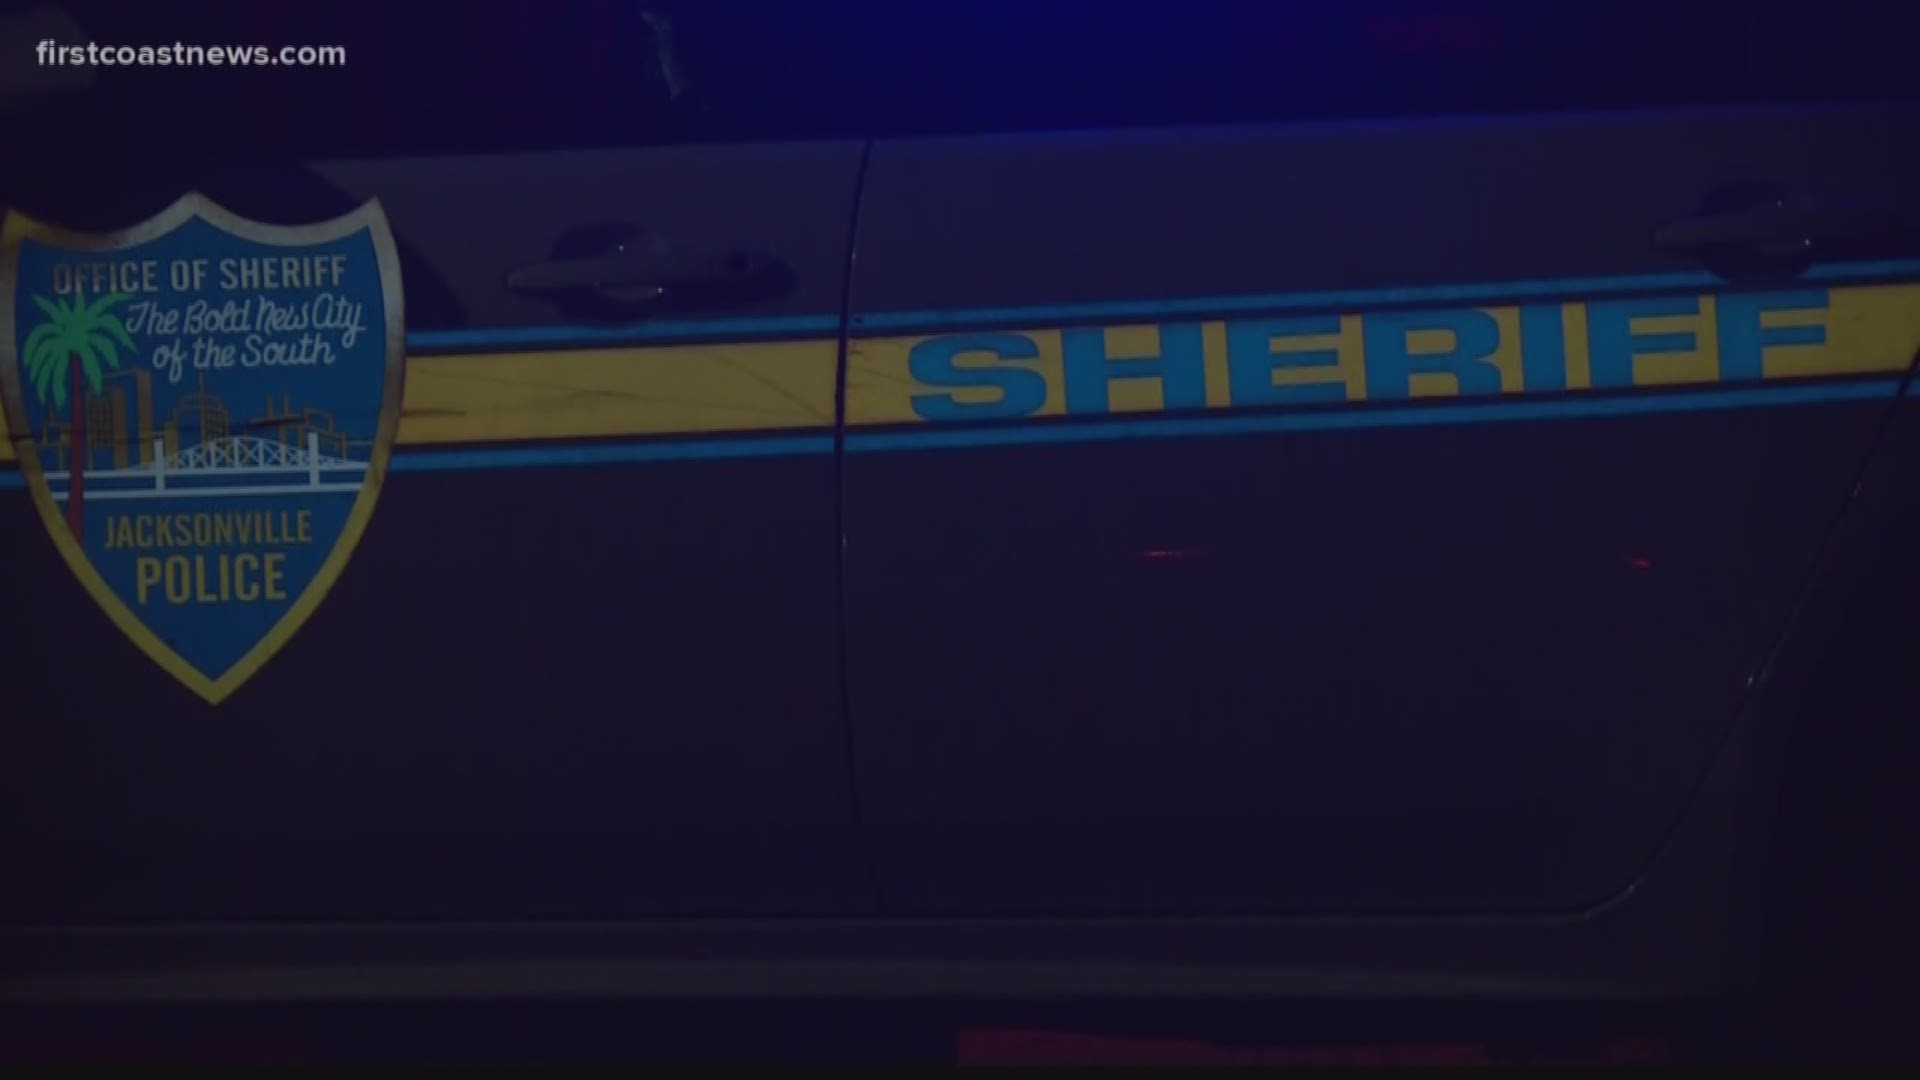 A motorcyclist was rushed to a local hospital with life-threatening injuries after colliding with an SUV in Mid-Westside Jacksonville, according to police.